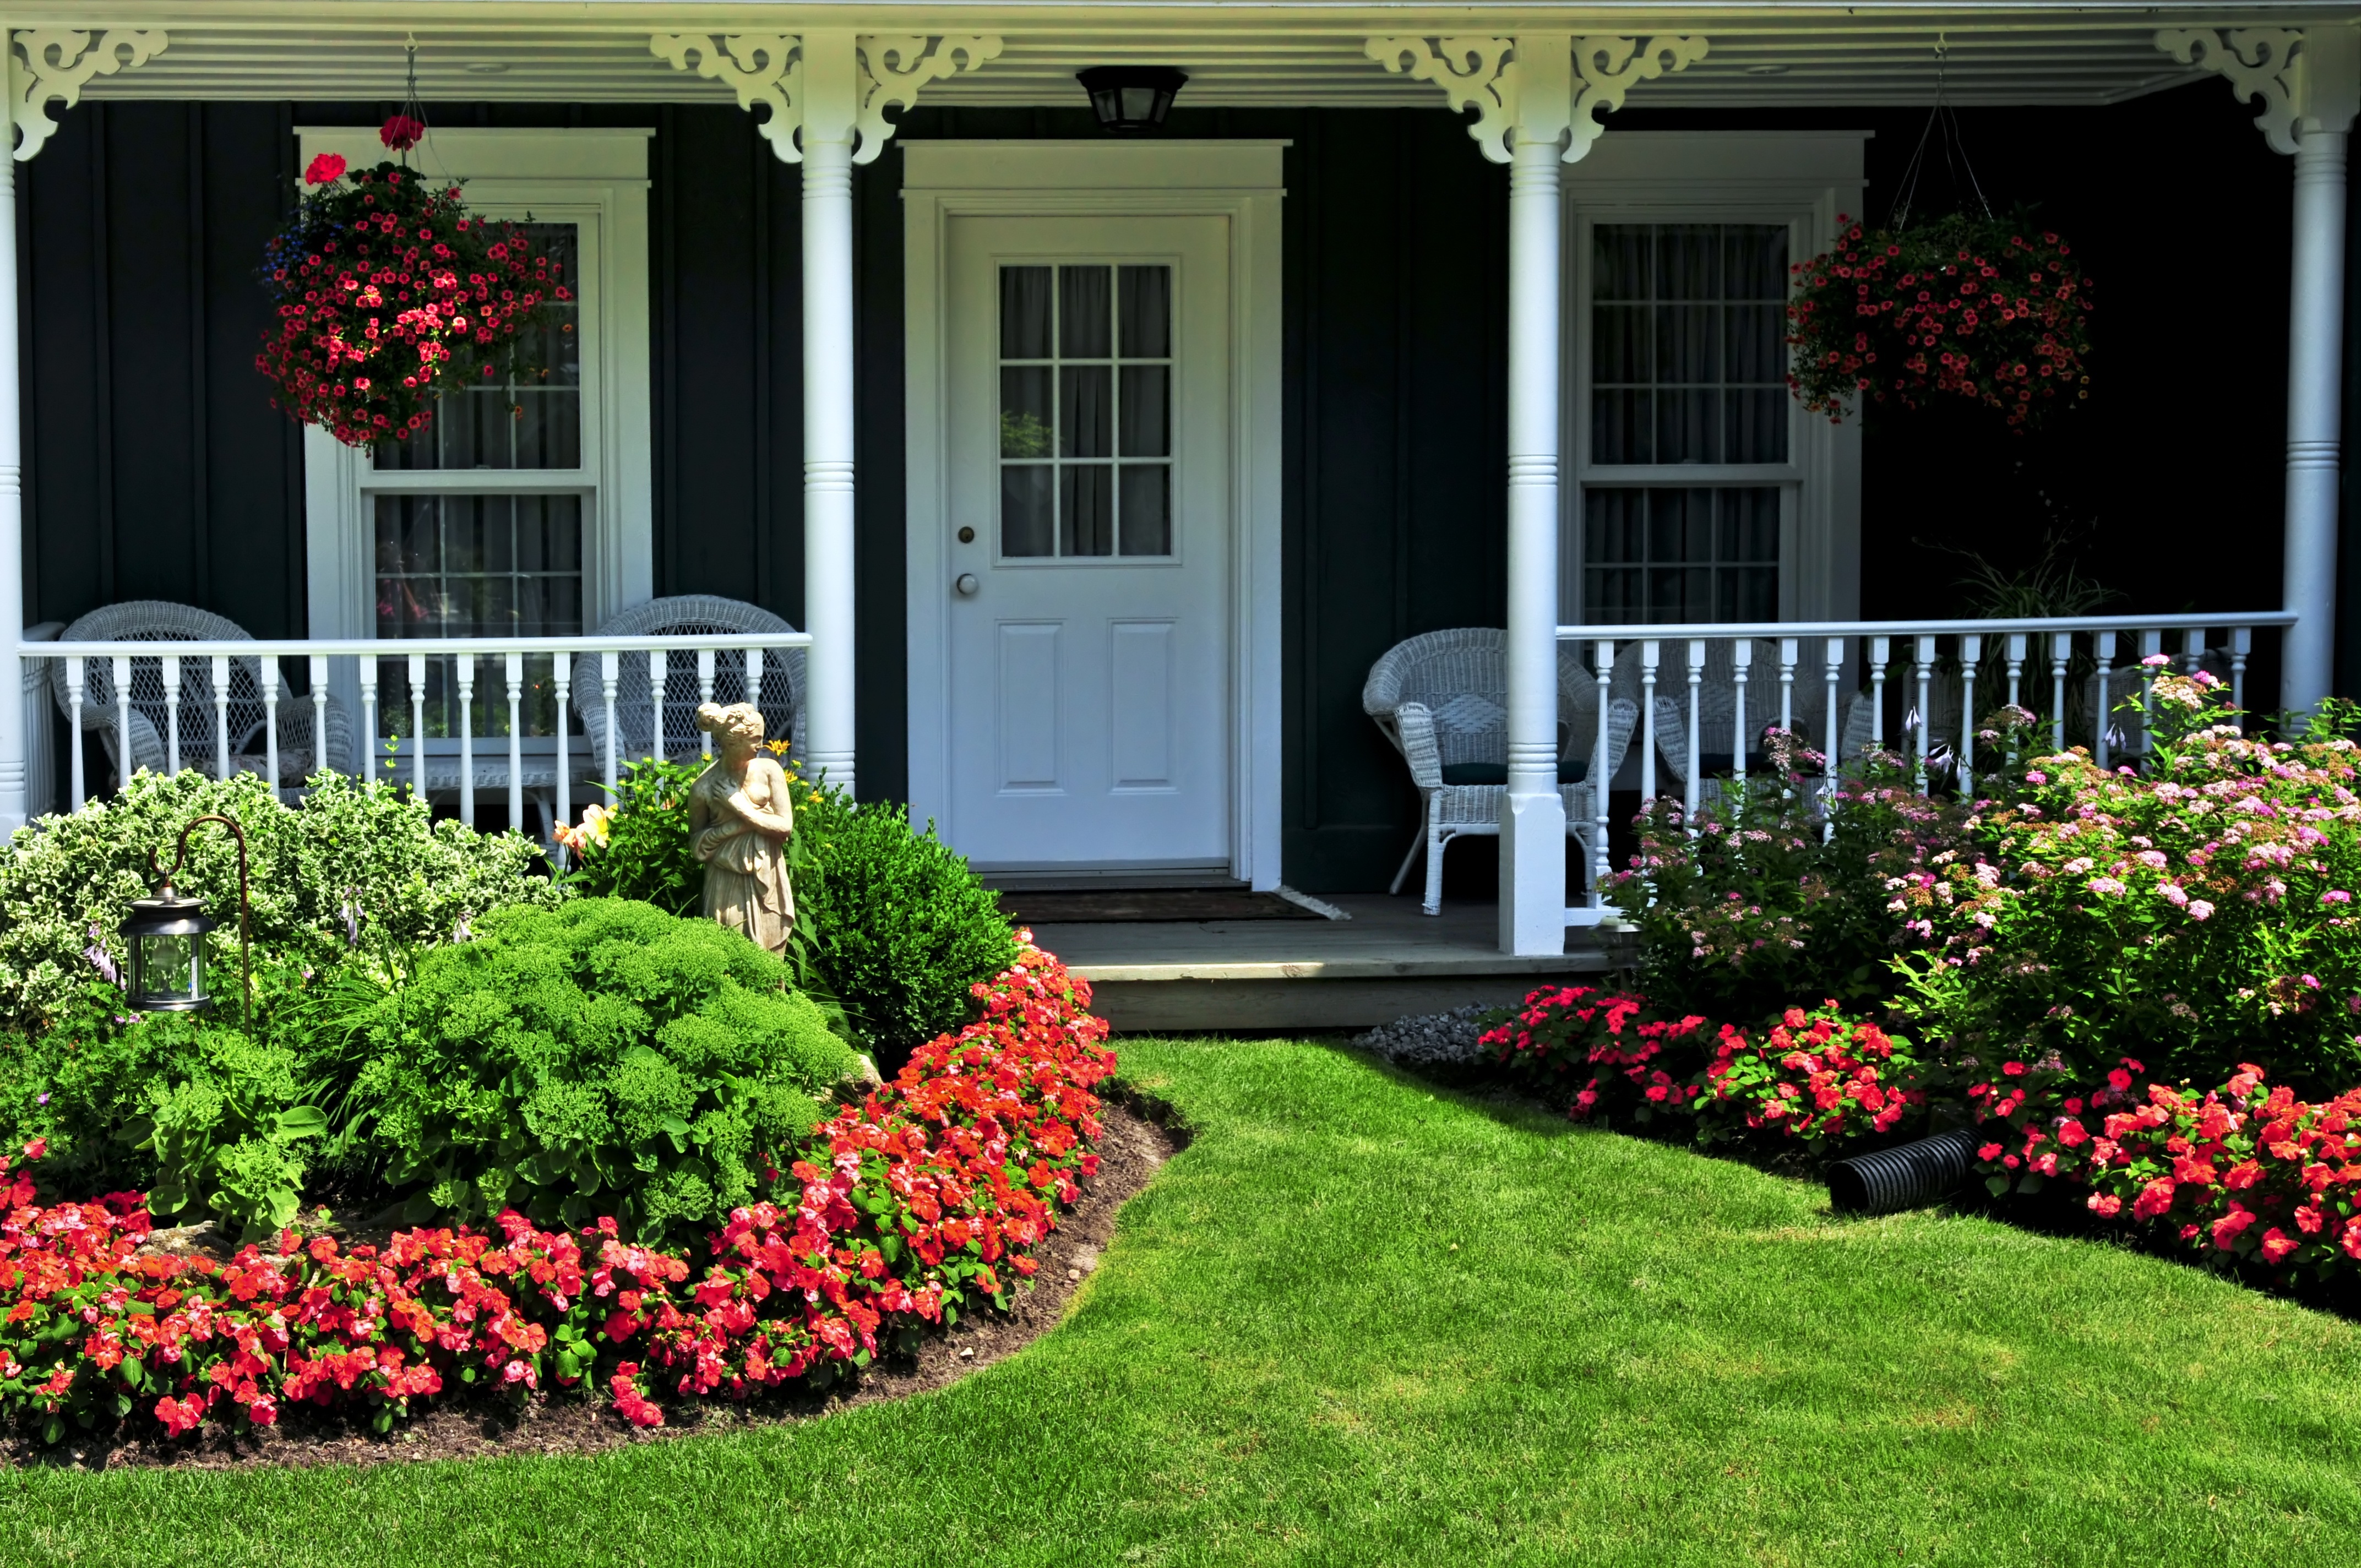 5 Easy Ways to Brighten up Your Curb Appeal